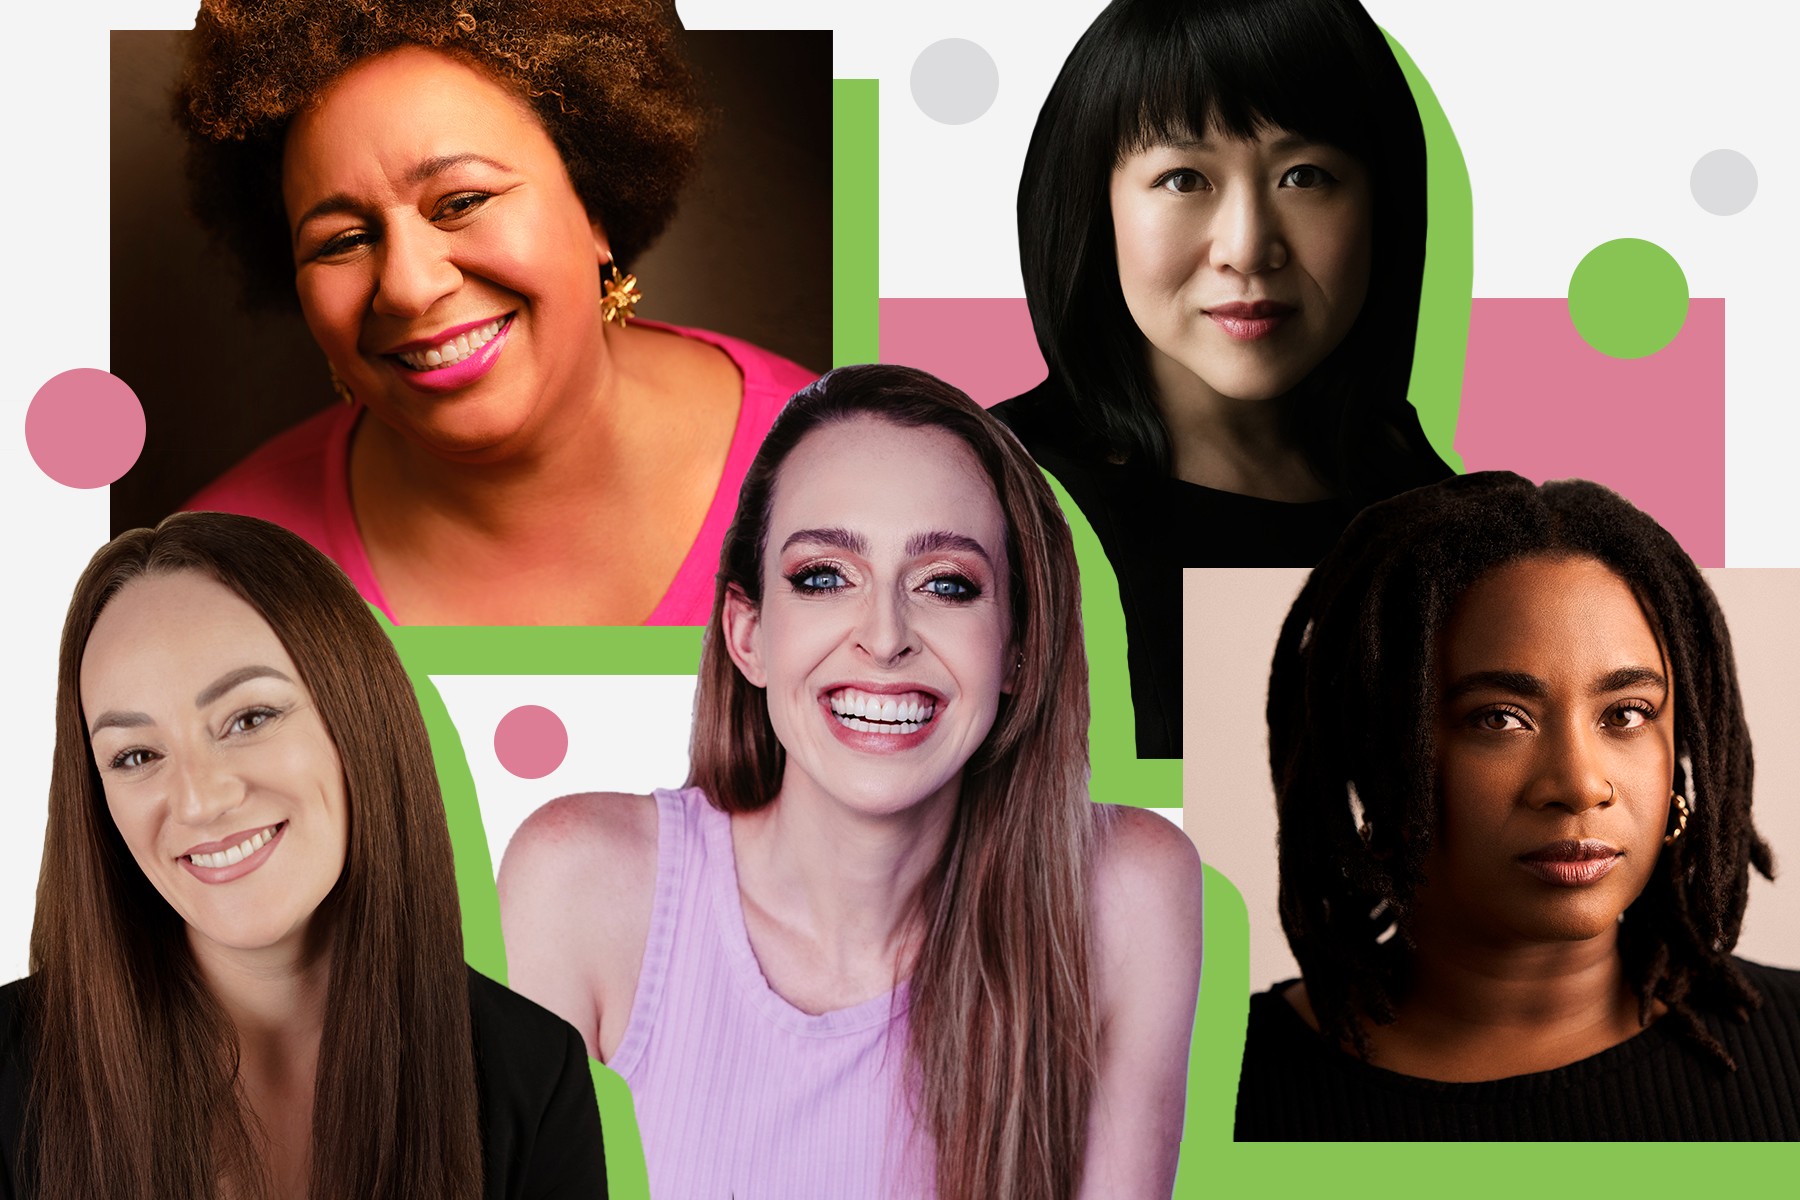 A colourful collage of author headshots seen against a pink and green pattern.